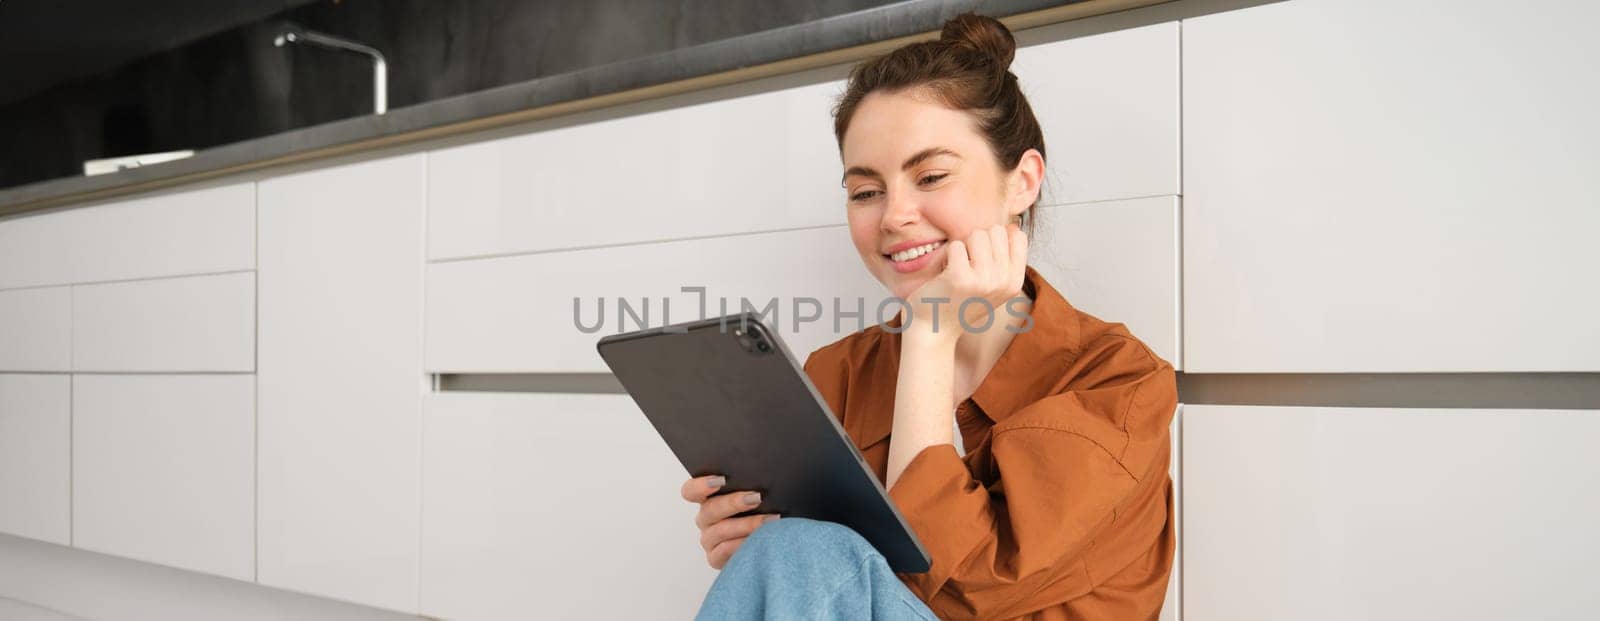 Portrait of beautiful, carefree young woman, sitting on kitchen floor with digital tablet, working remote from home, using device to check her mail. Girl watching something on her device.